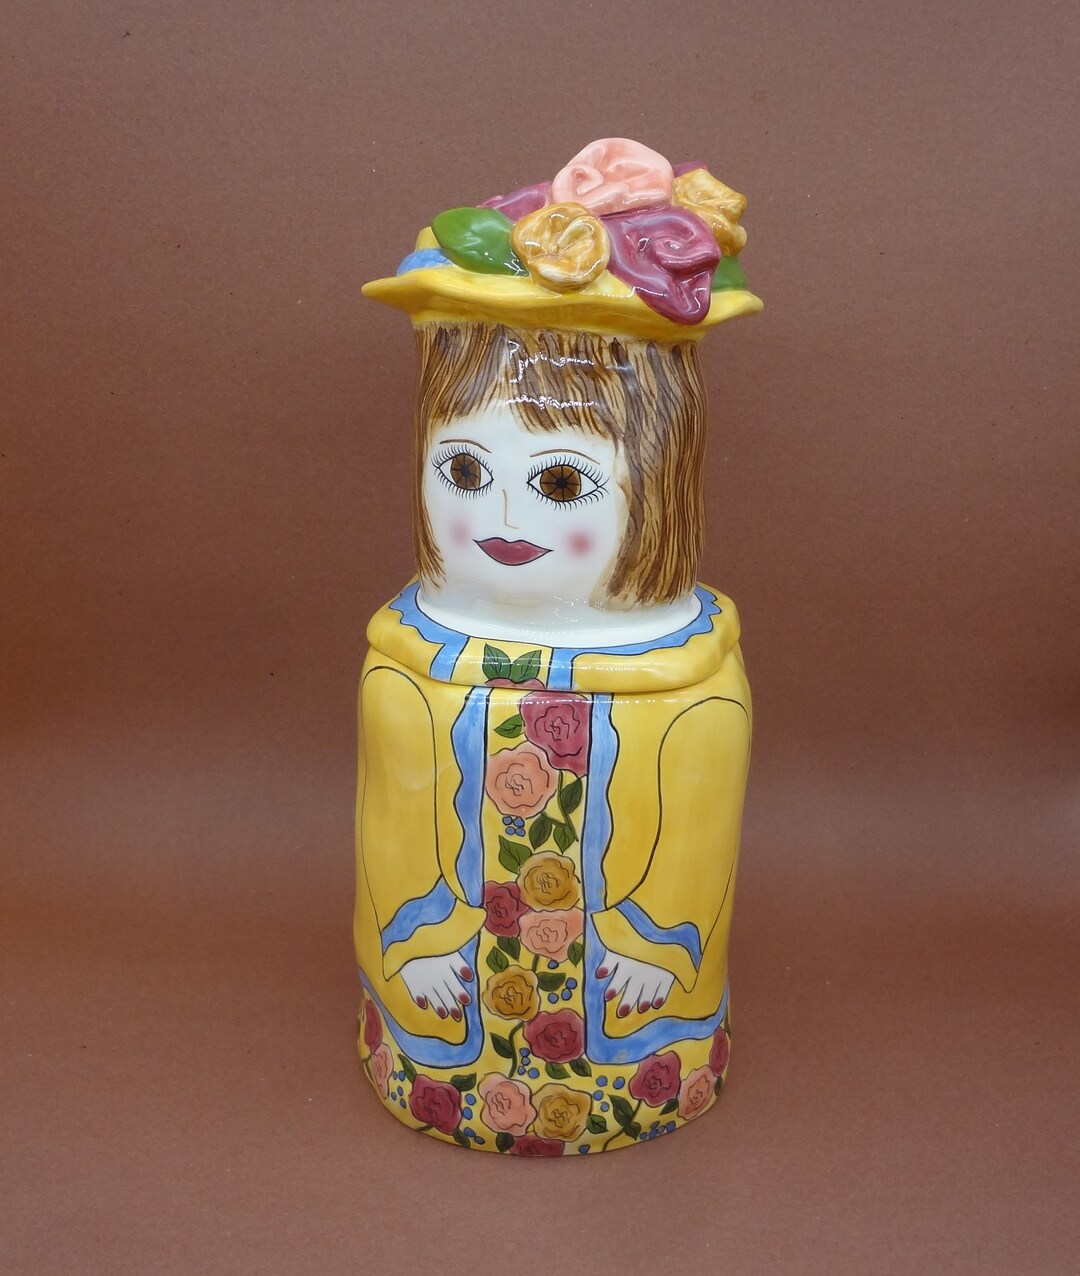 COOKIE JAR Susan Paley by Ganz, minna With Yellow Dress, Floral Hat - Etsy